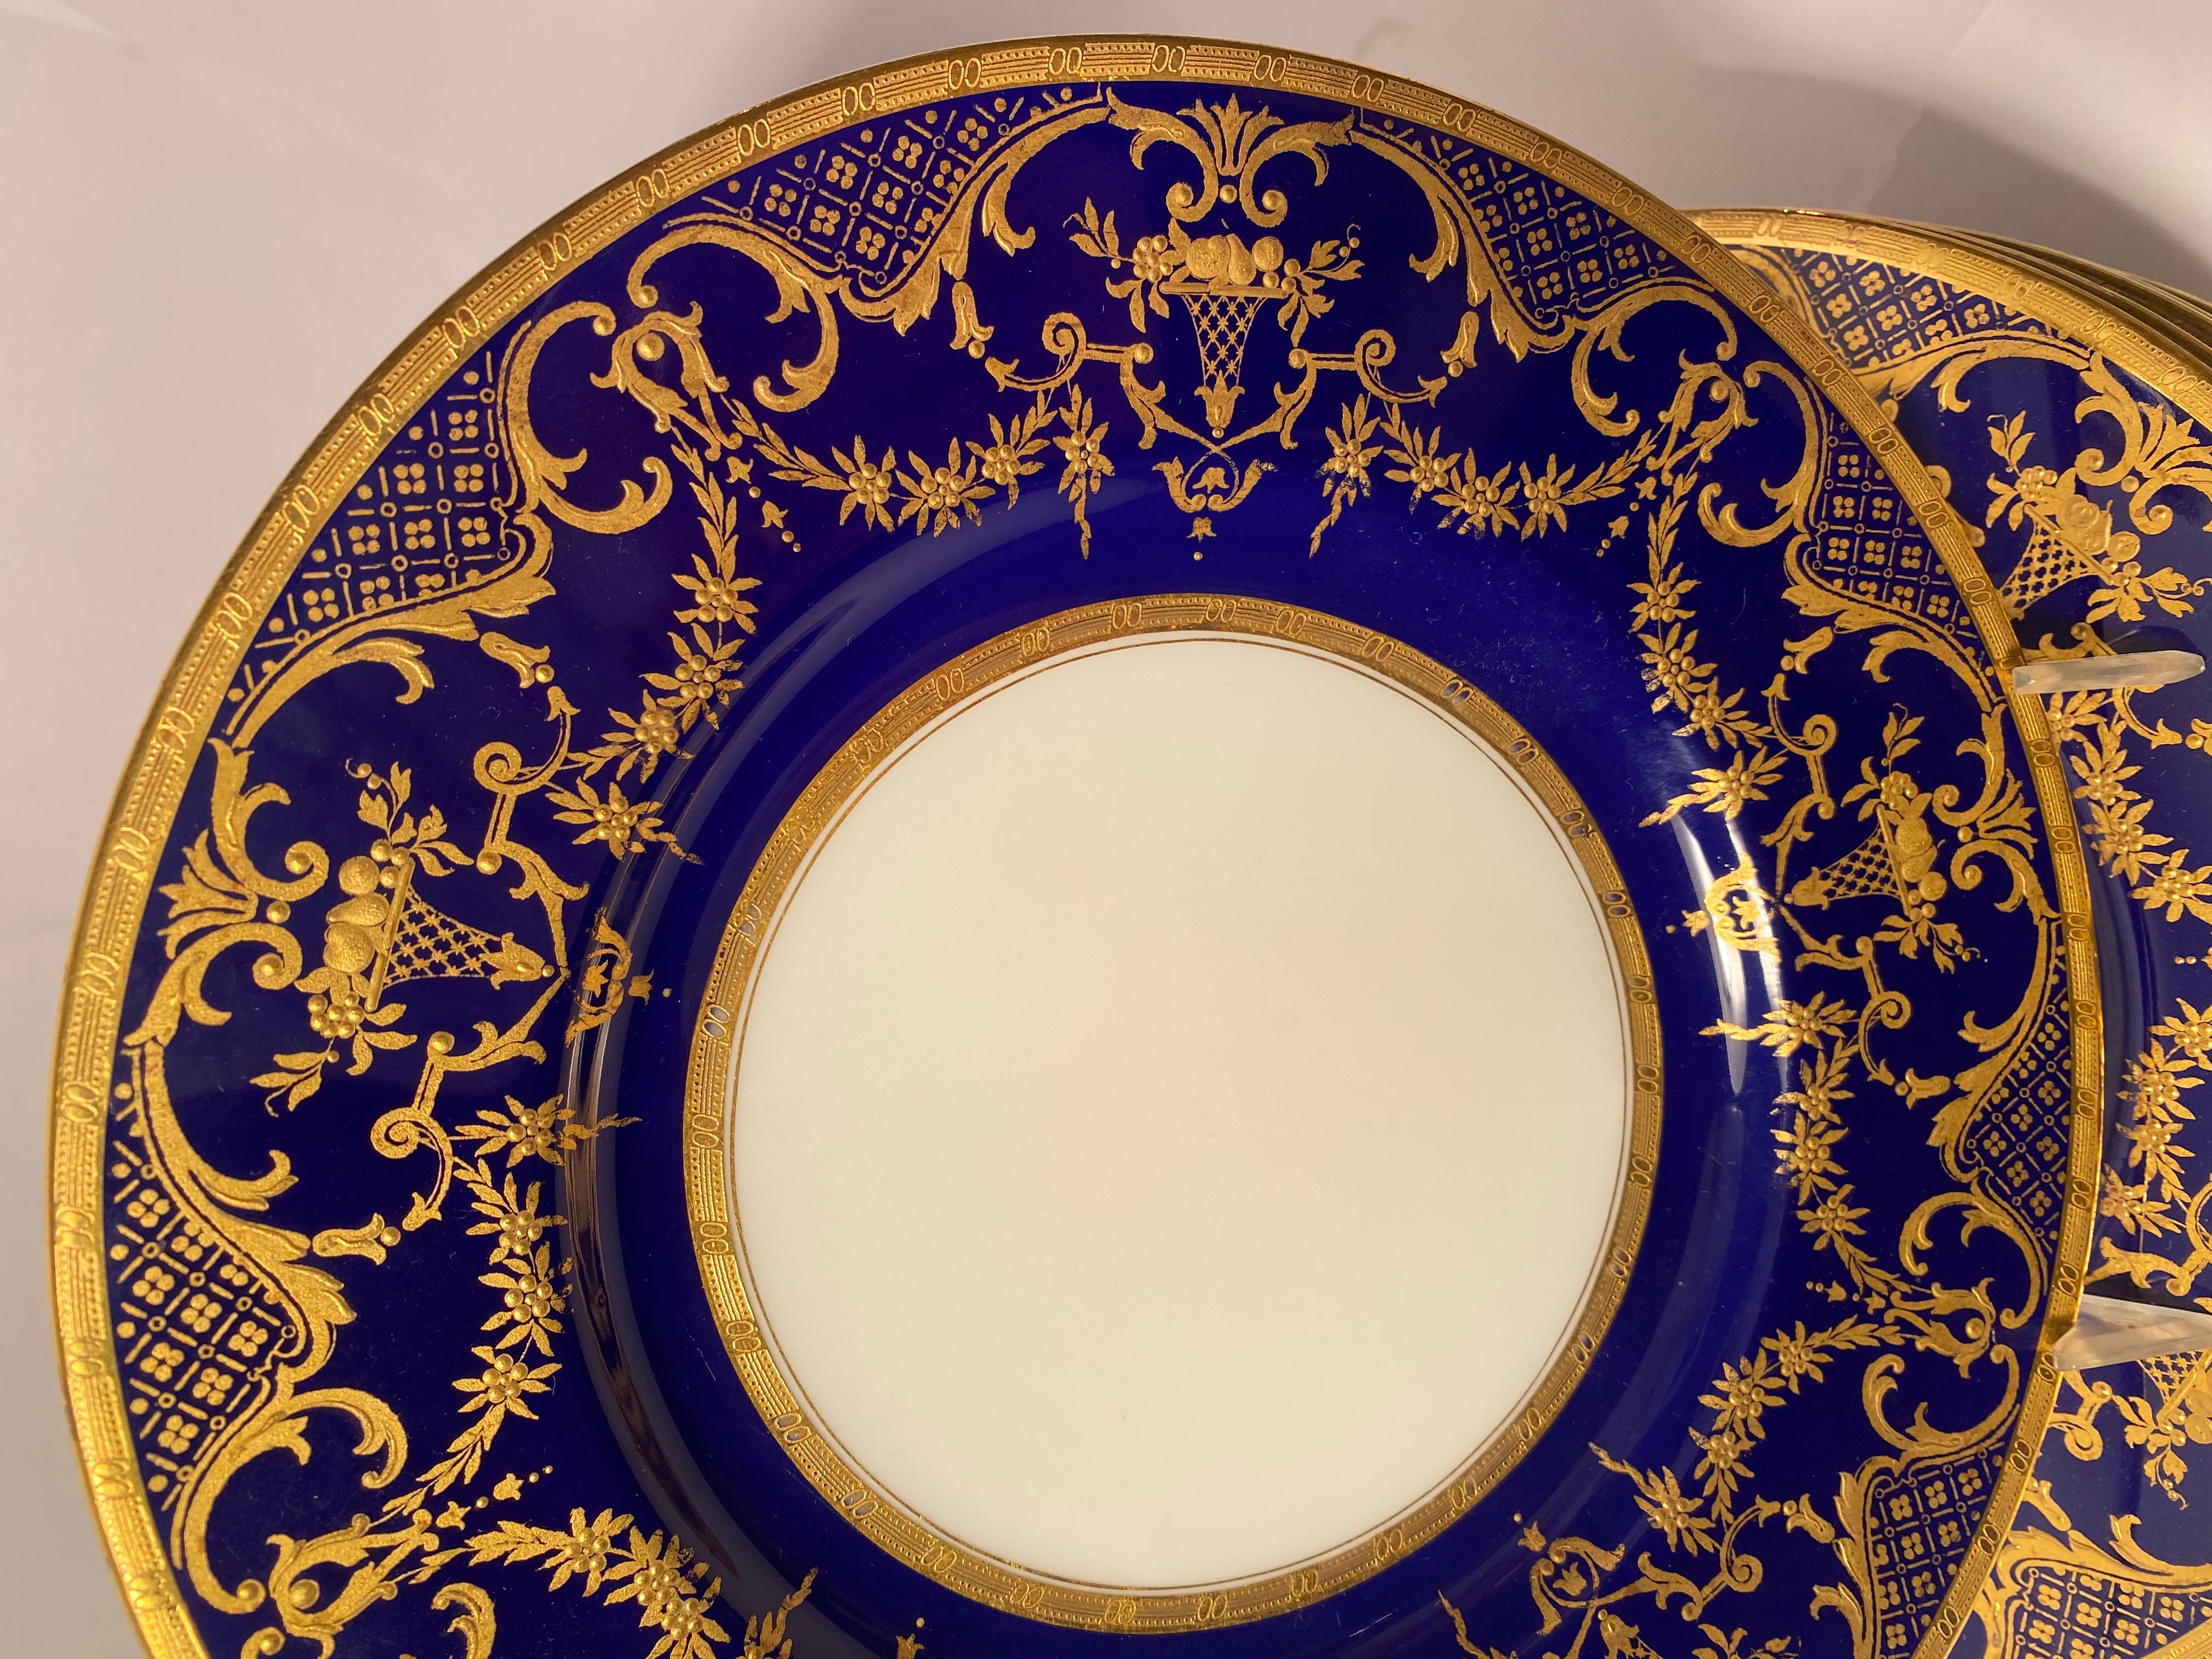 From the storied Gilded Age firm of Minton, England we have 12 elegant cobalt blue with raised gilding plates that were custom ordered through the retailer Davis, Collamore and Company New York. The plates are in very good antique condition and will